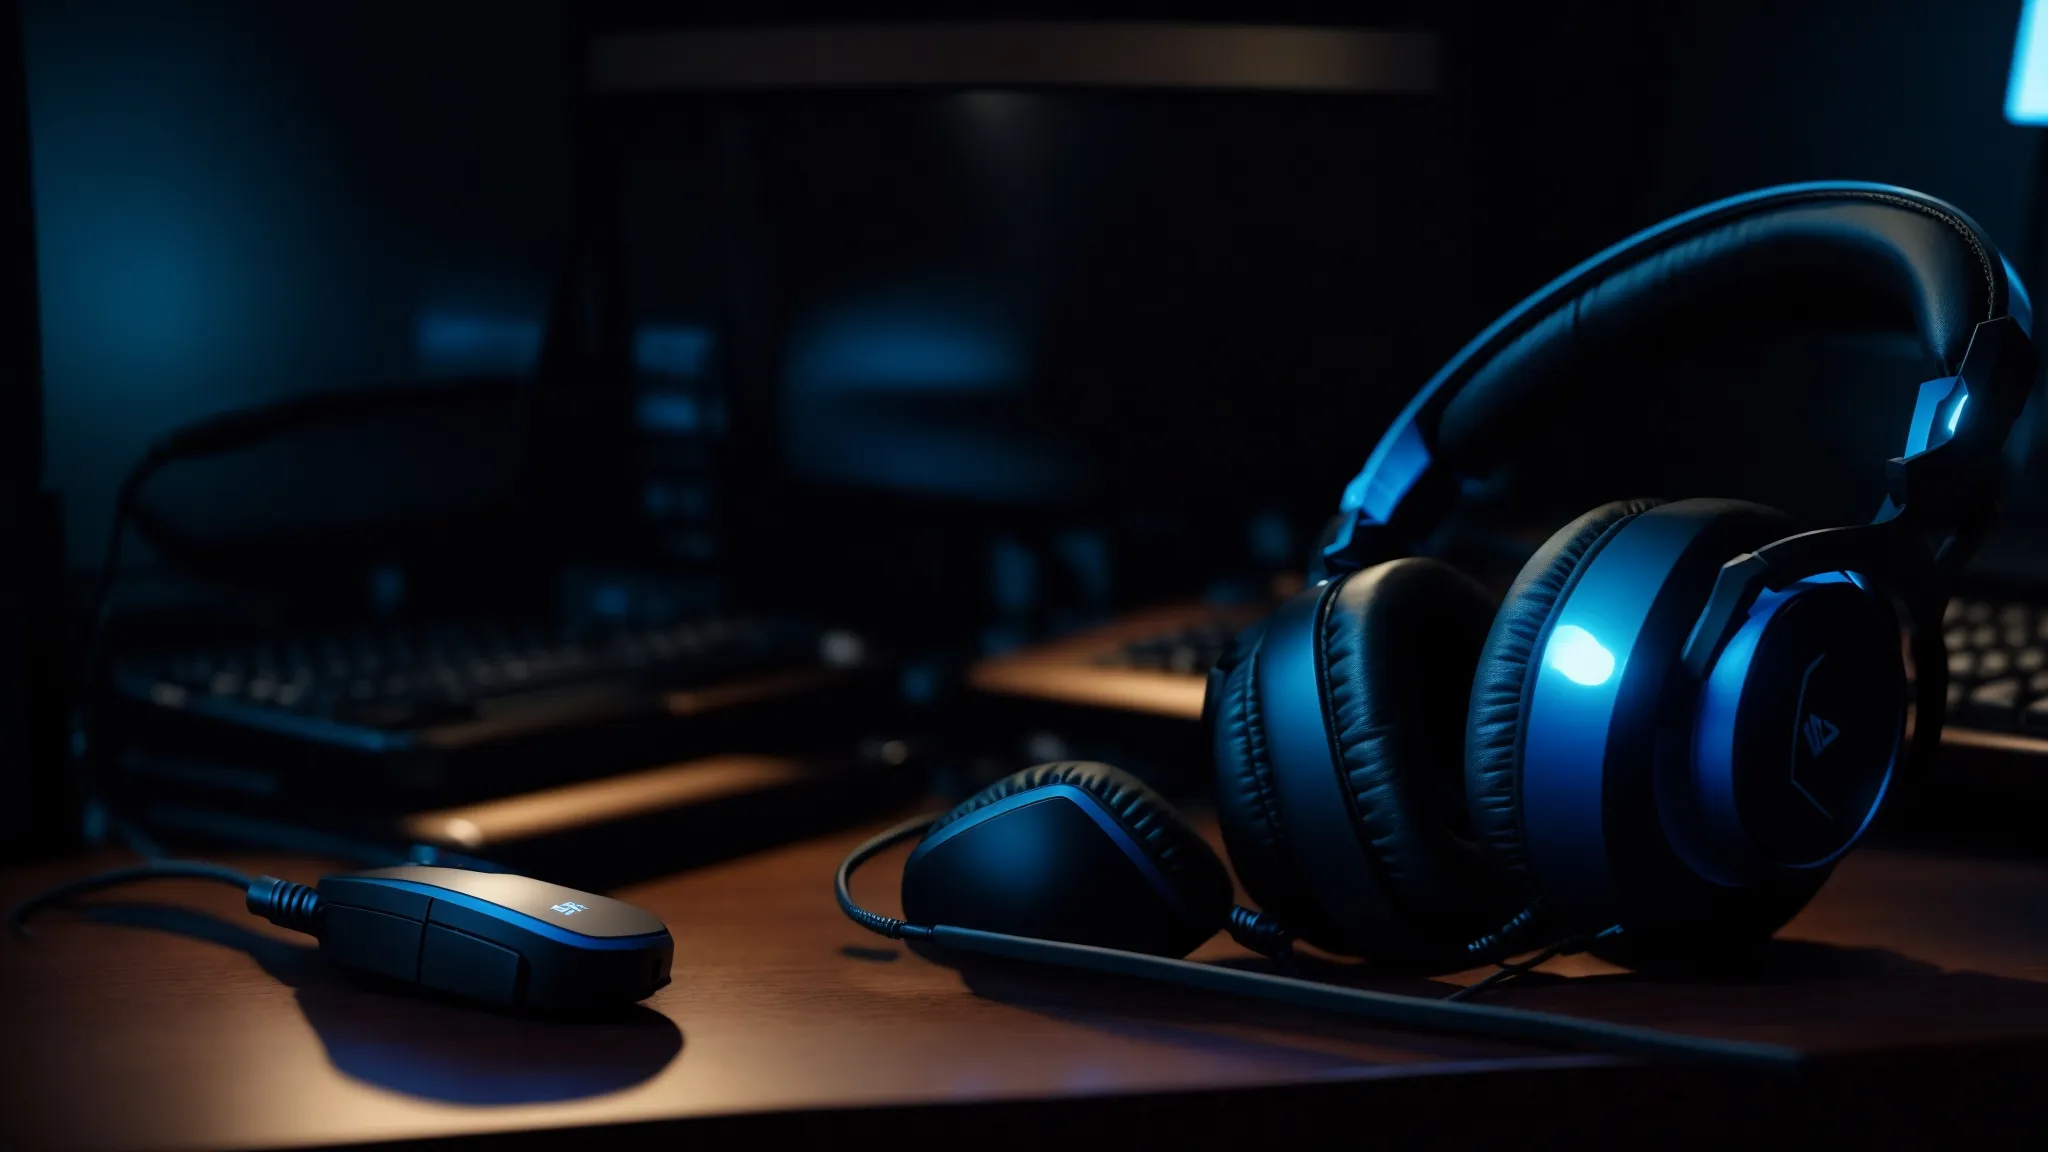 a sleek, black gaming headset rests on a dark, wooden desk beside a glowing computer and gaming keyboard, bathed in soft, blue light.